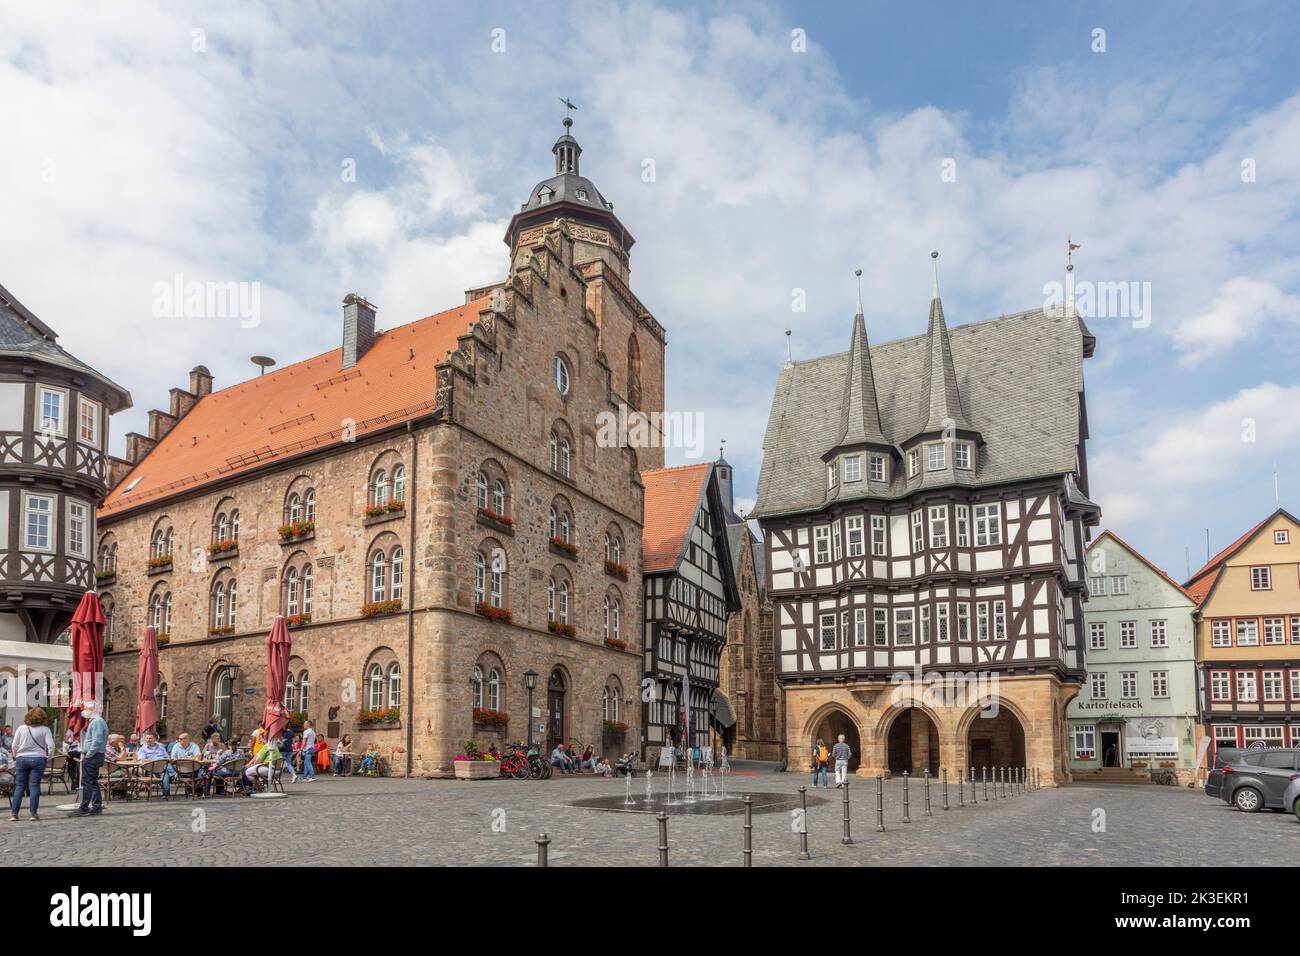 Alsfeld, Germany - June 25, 2021: famous town hall and half timbered historic houses at central square in Alsfeld, germany. Stock Photo